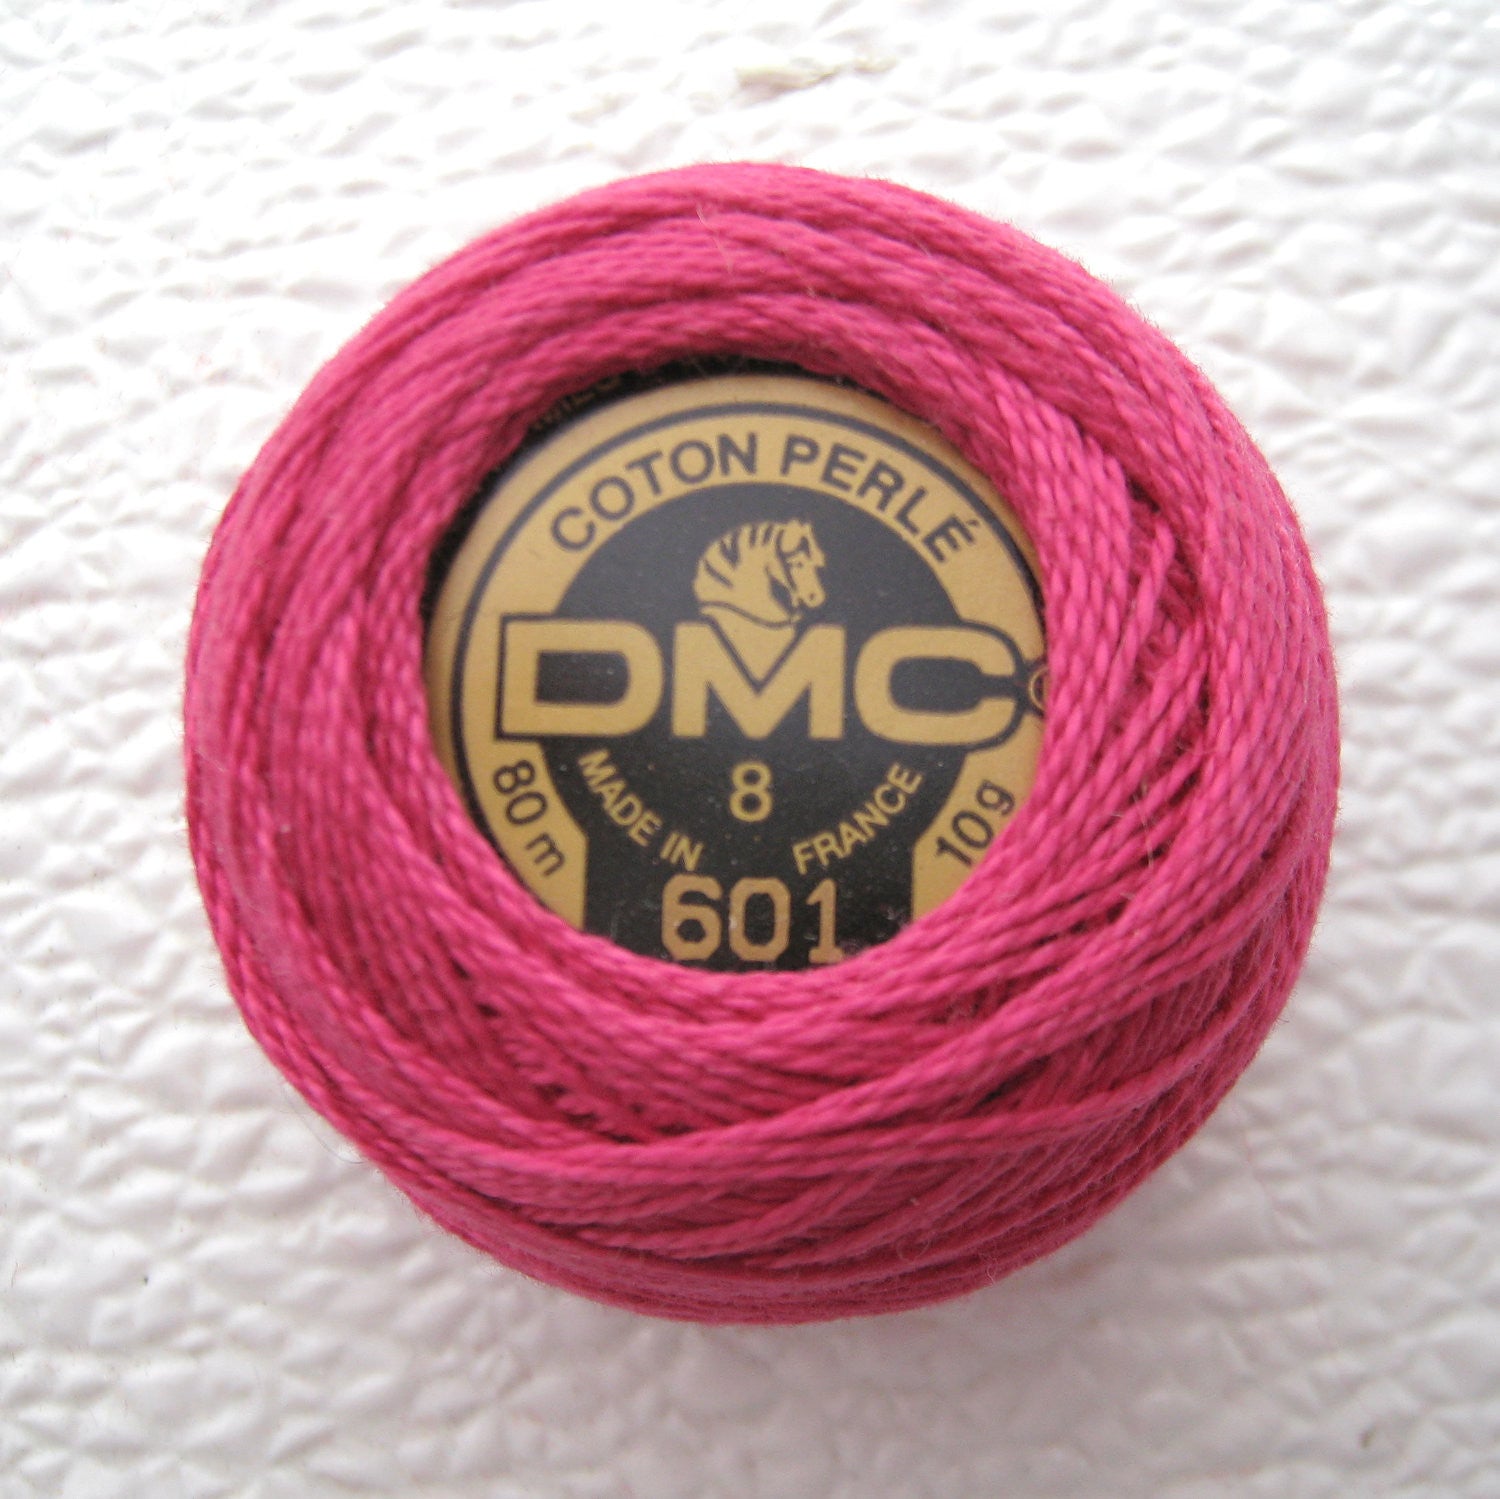 Buy and stitch DMC Pearl Cotton Size 8, 25m, 115AR/8-726, € 2,39